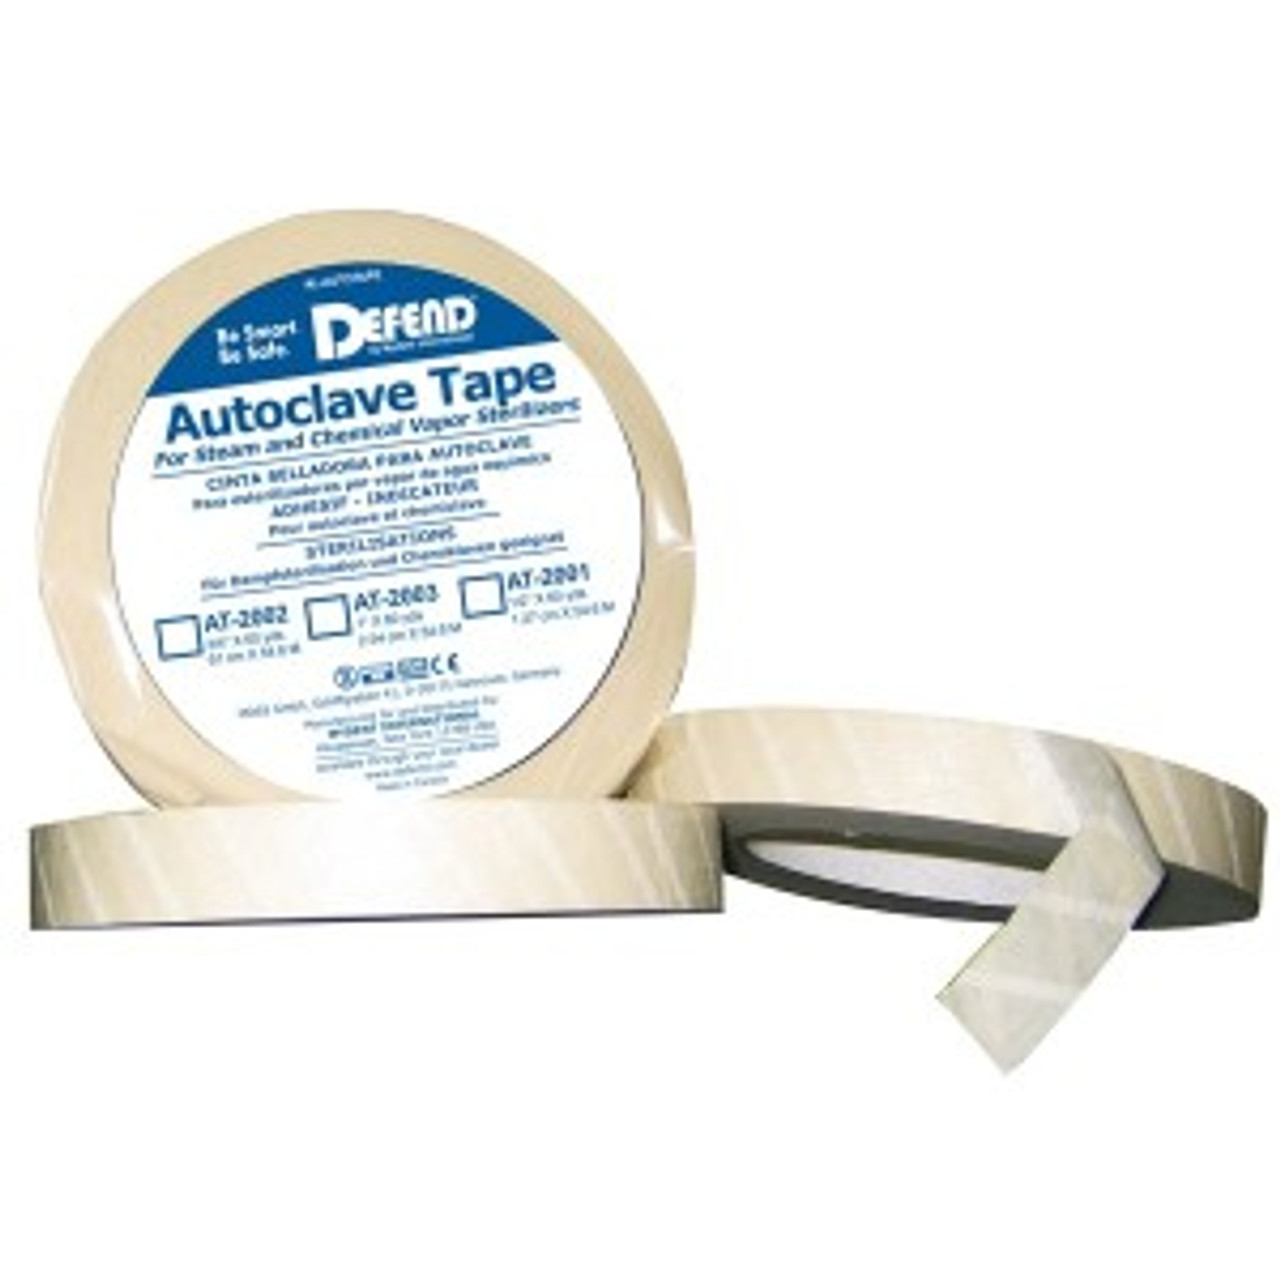 Defend Autoclave Indicator Tape 3/4" 60 Yd Roll